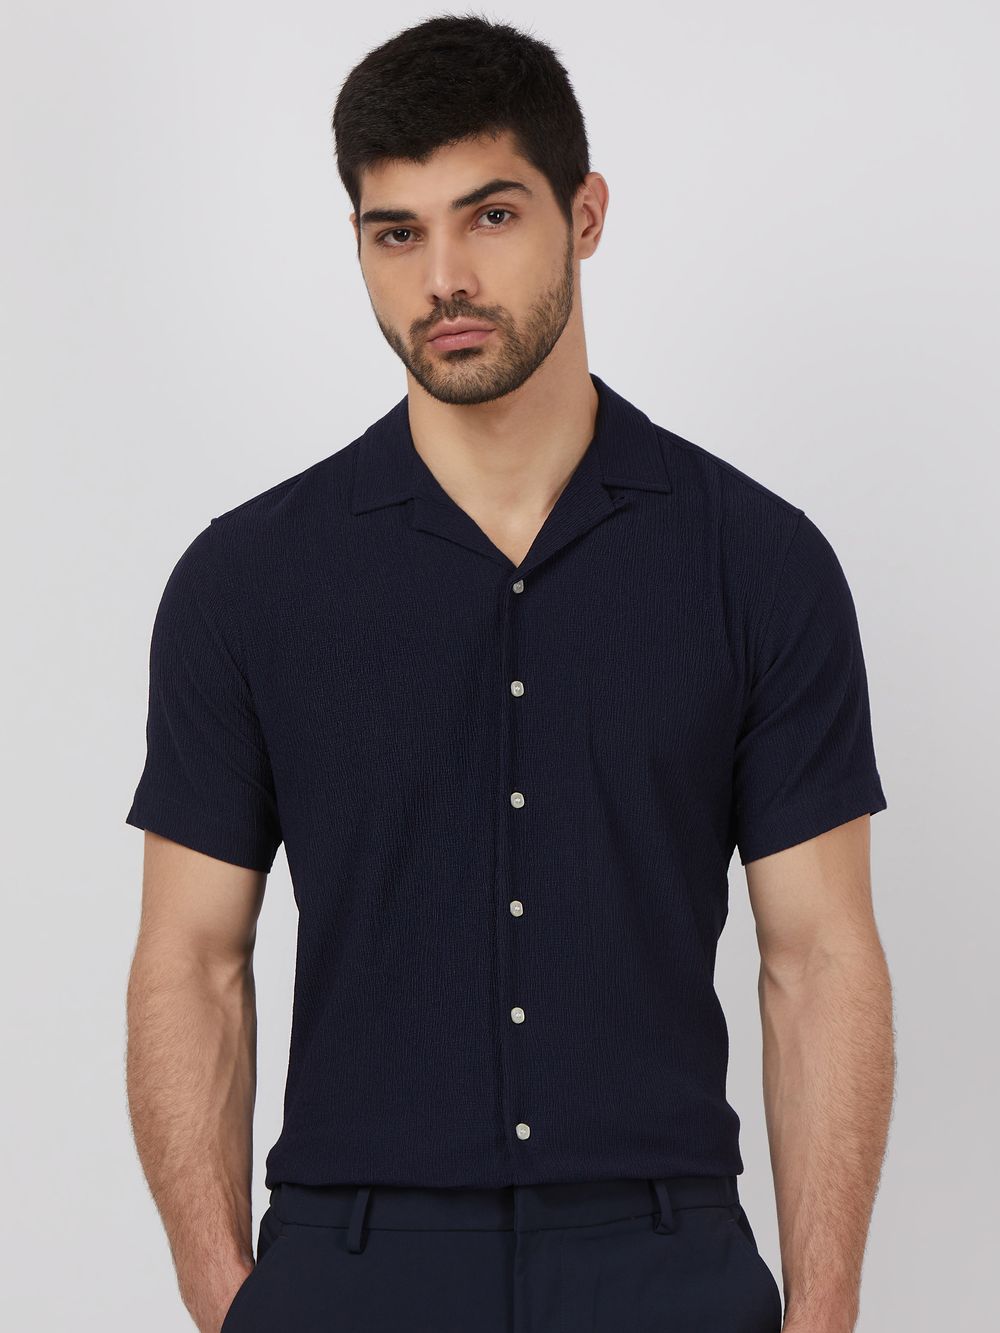 Navy Textured Plain Relaxed Fit Casual Shirt